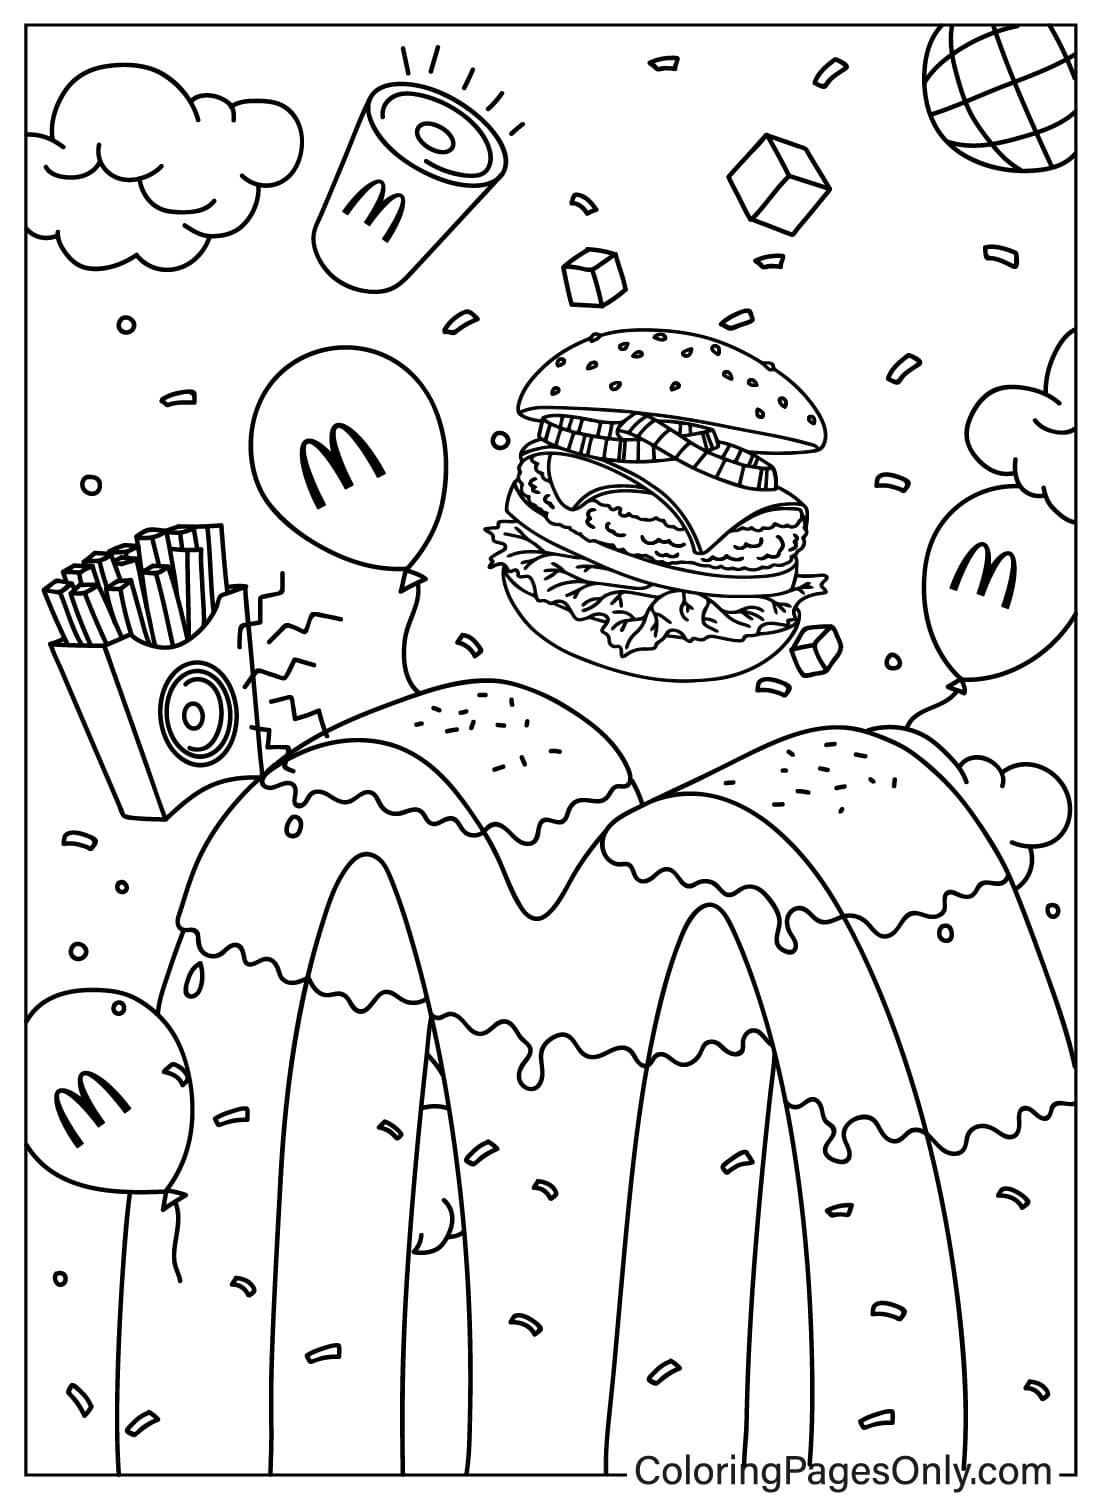 Drawing McDonalds Coloring Page from McDonald's